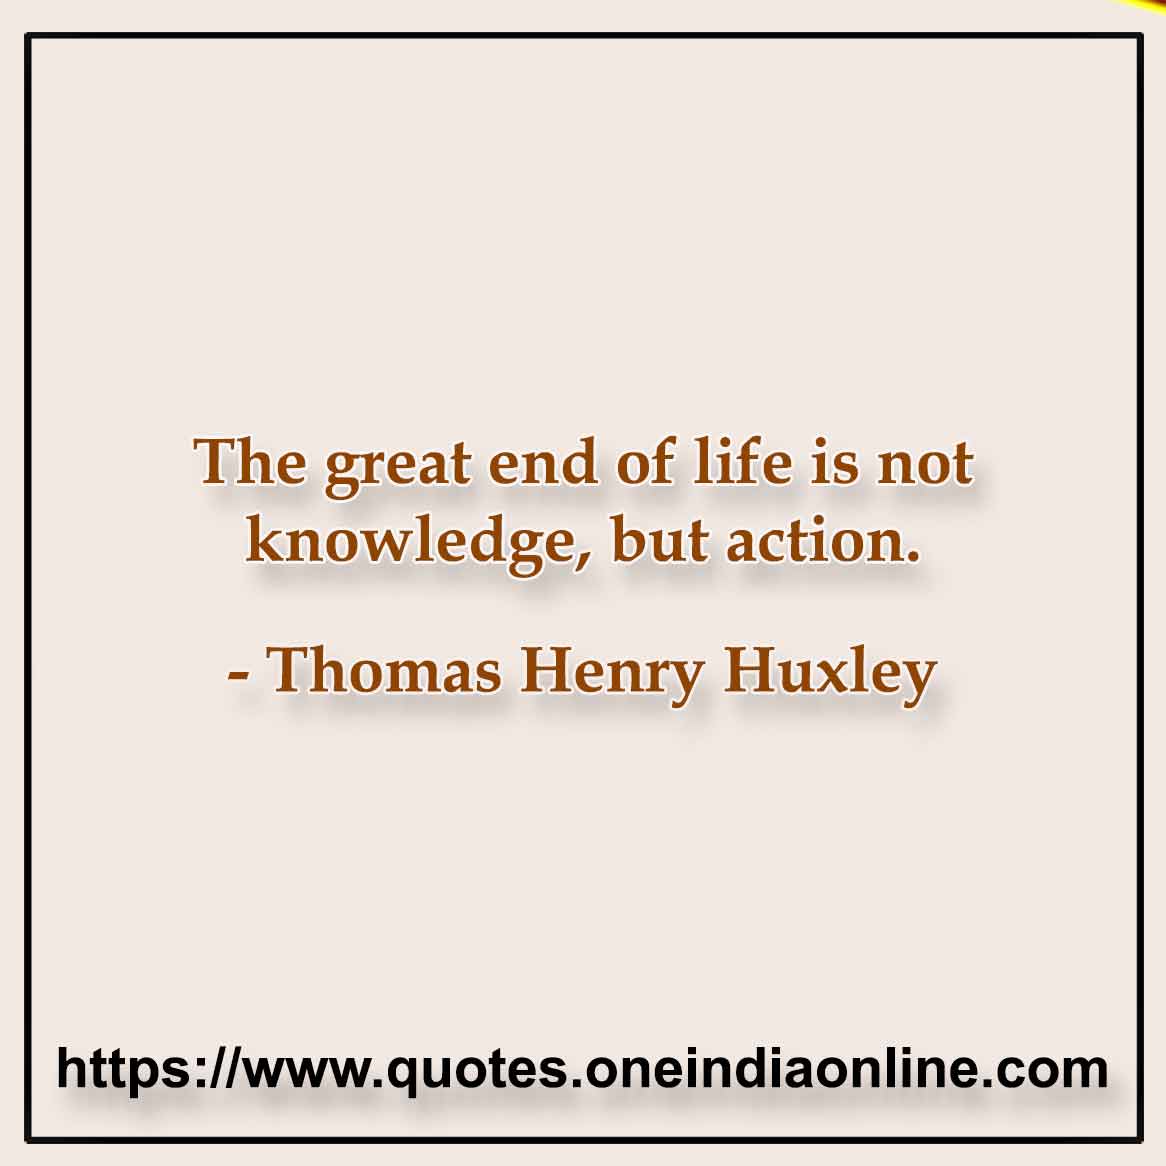 The great end of life is not knowledge, but action. Thomas Henry Huxley